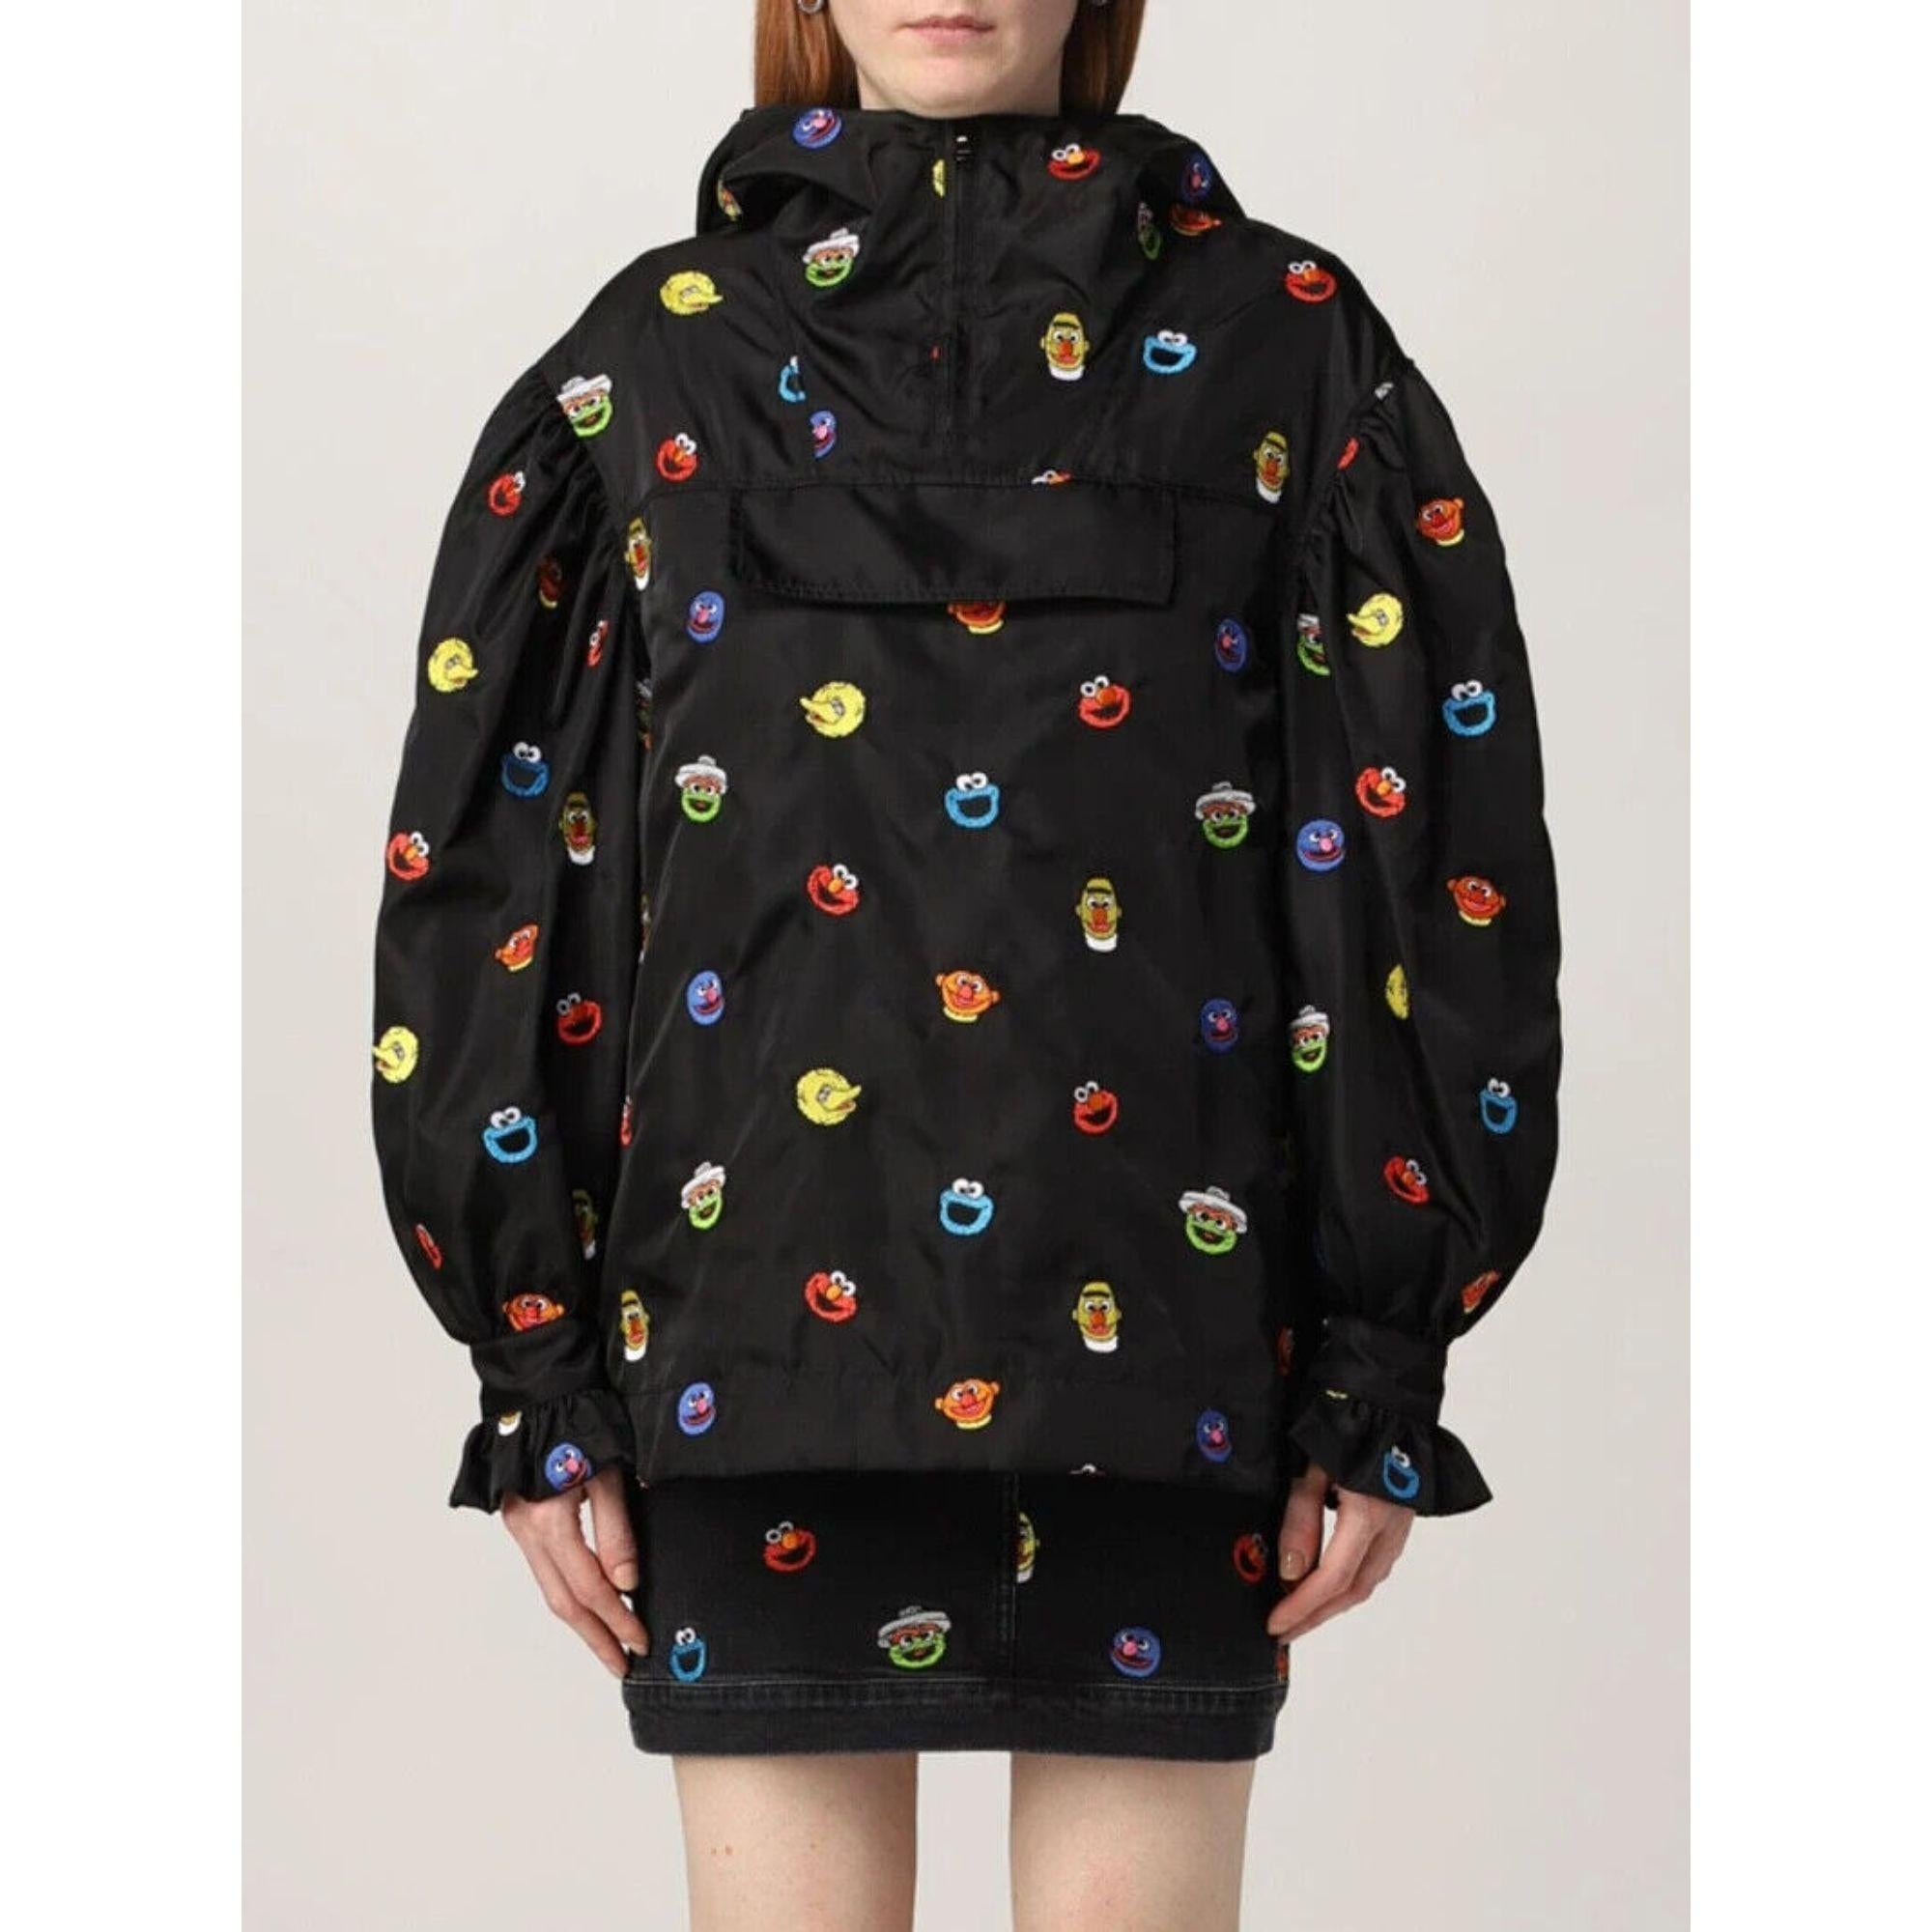 AW21 Moschino Couture Jeremy Scott Sesame Street Embroidered Black Hooded Jacket

Additional Information:
Material: 100% Viscose
Color: Black, Red, Yellow, Orange, Green, Blue
Size: IT 38 / US 4
Pattern: Allover Embroidered Characters
Style: